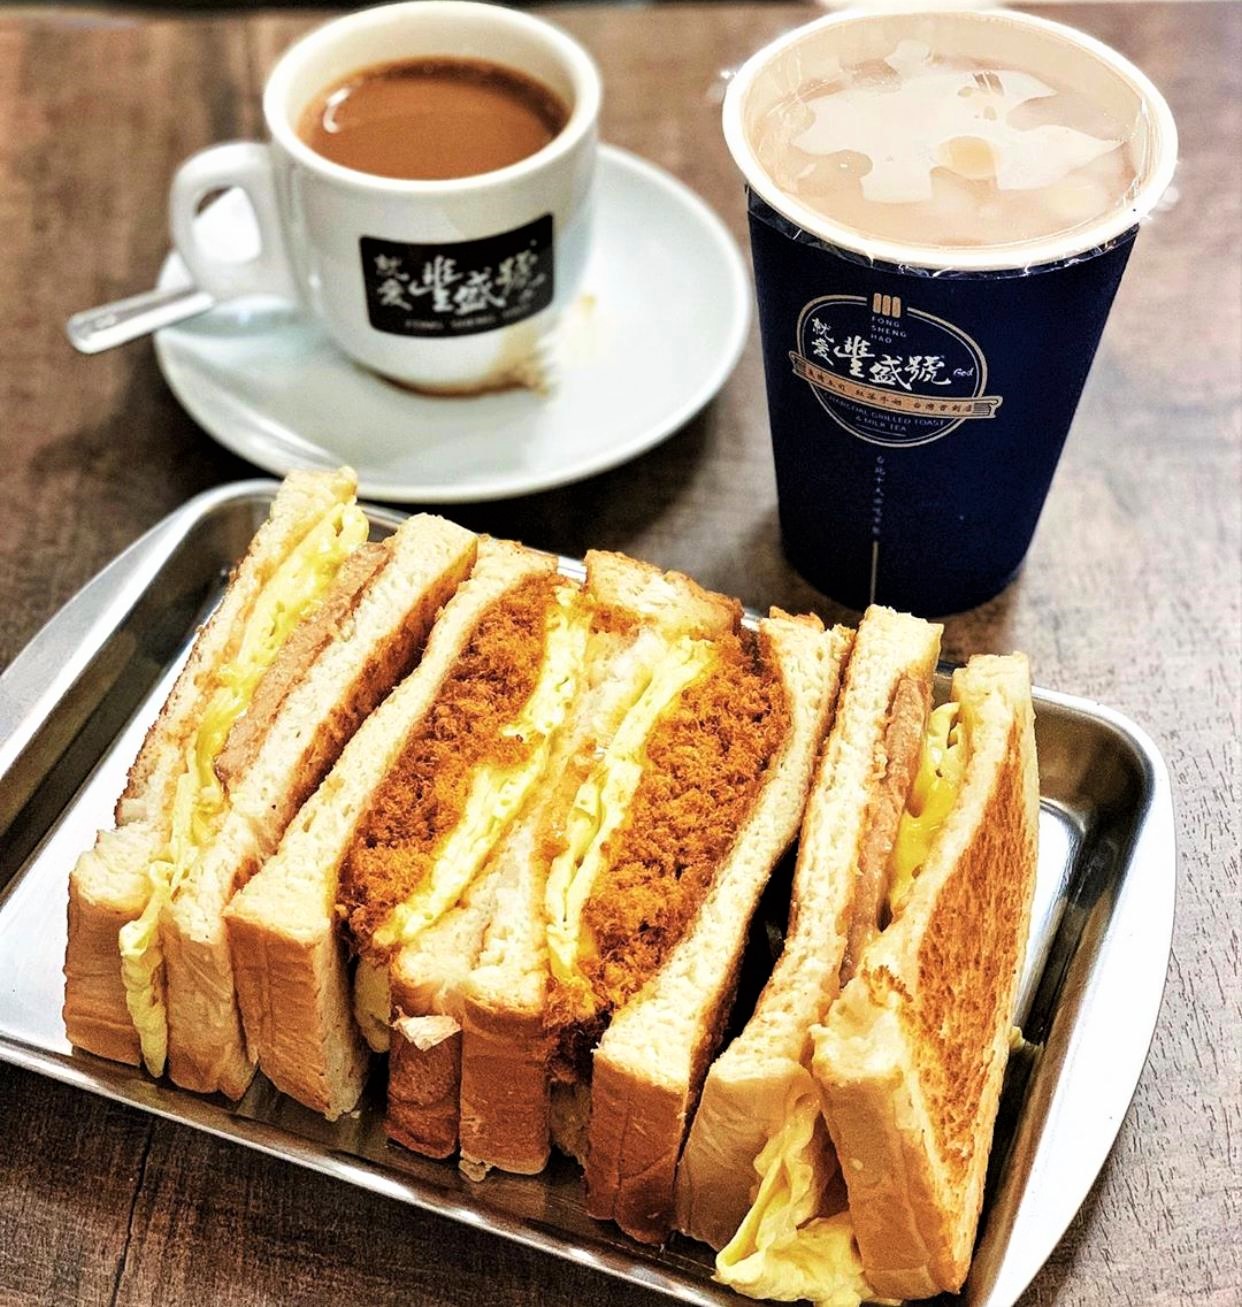 Fong Sheng Hao's Taiwanese breakfast toast are made with bread freshly baked in-house as well as condiments that are made from their own special recipe.